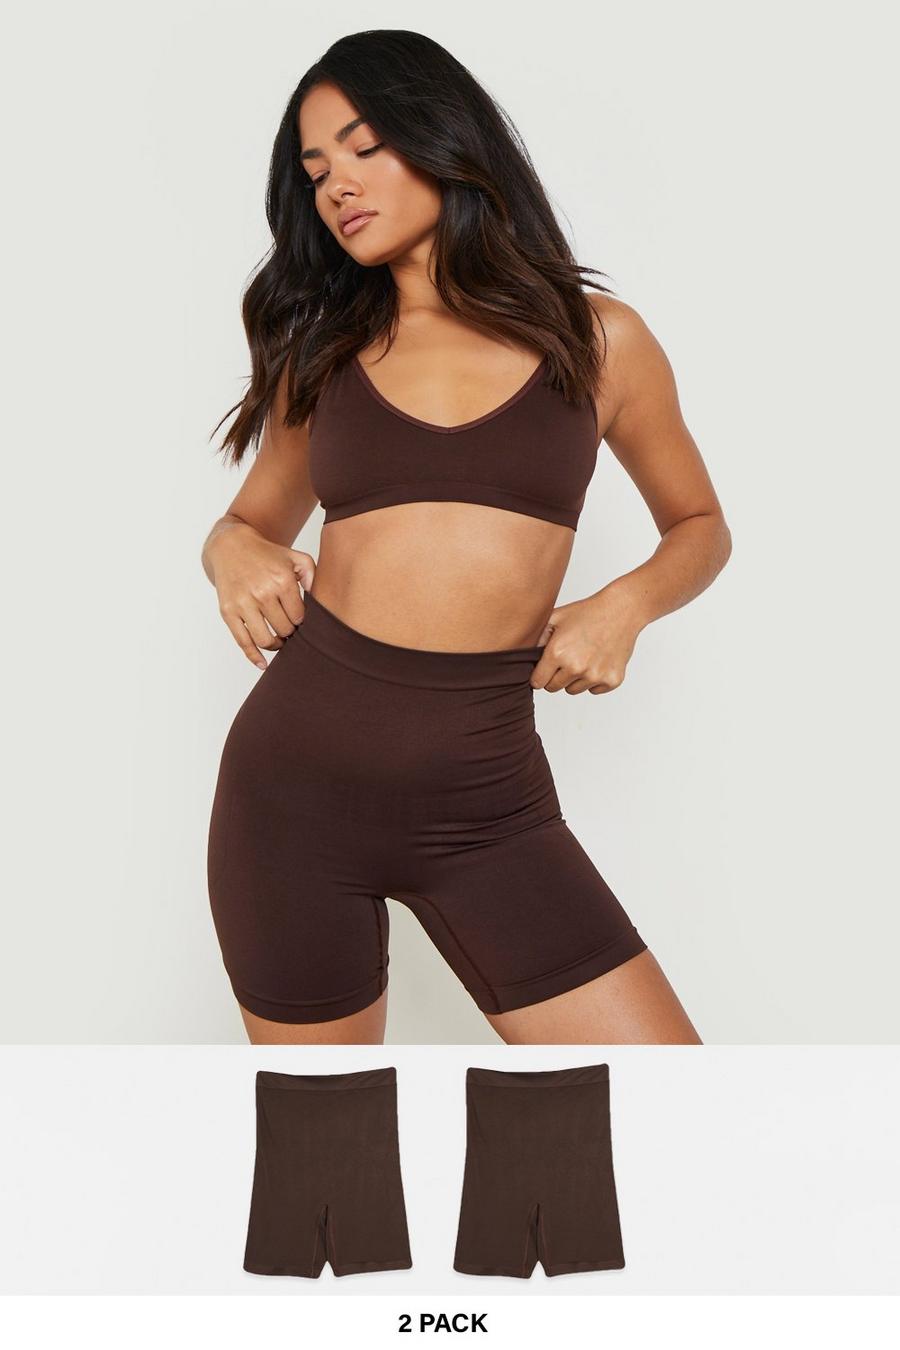 Chocolate brown 2 Pack High Waist Shaping Control Short